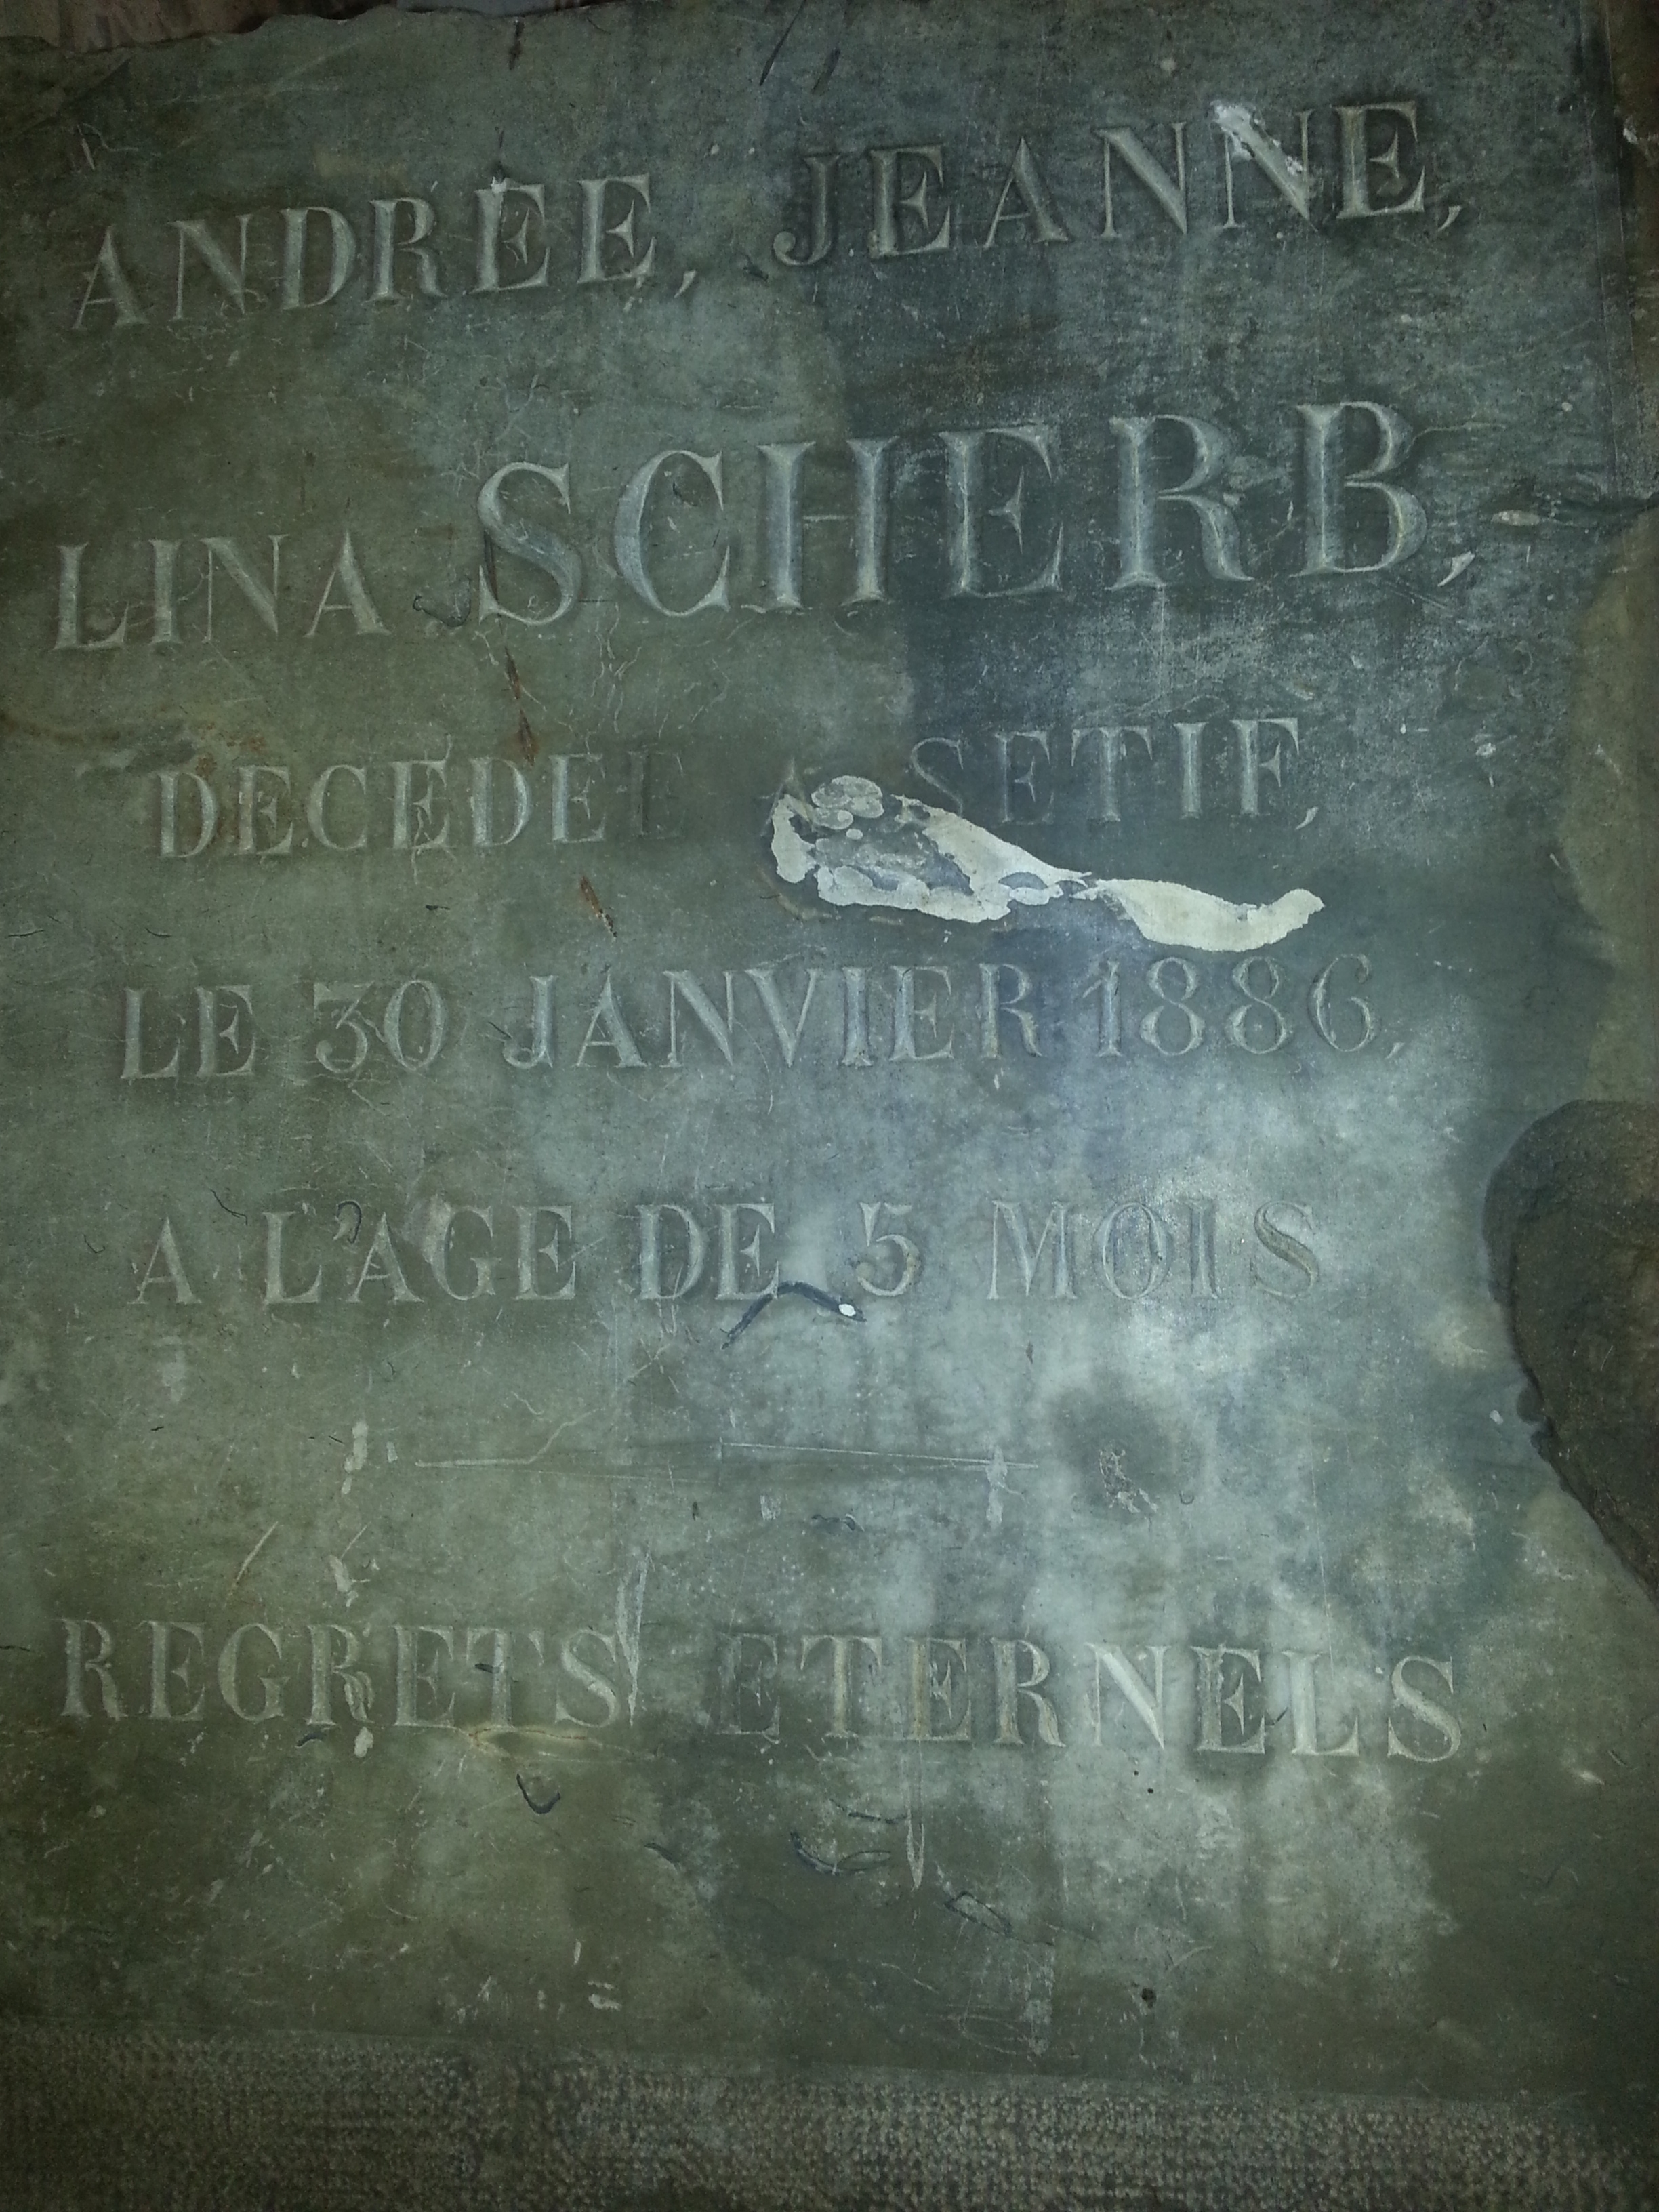 Andree Jeanne Lina Scherb grave